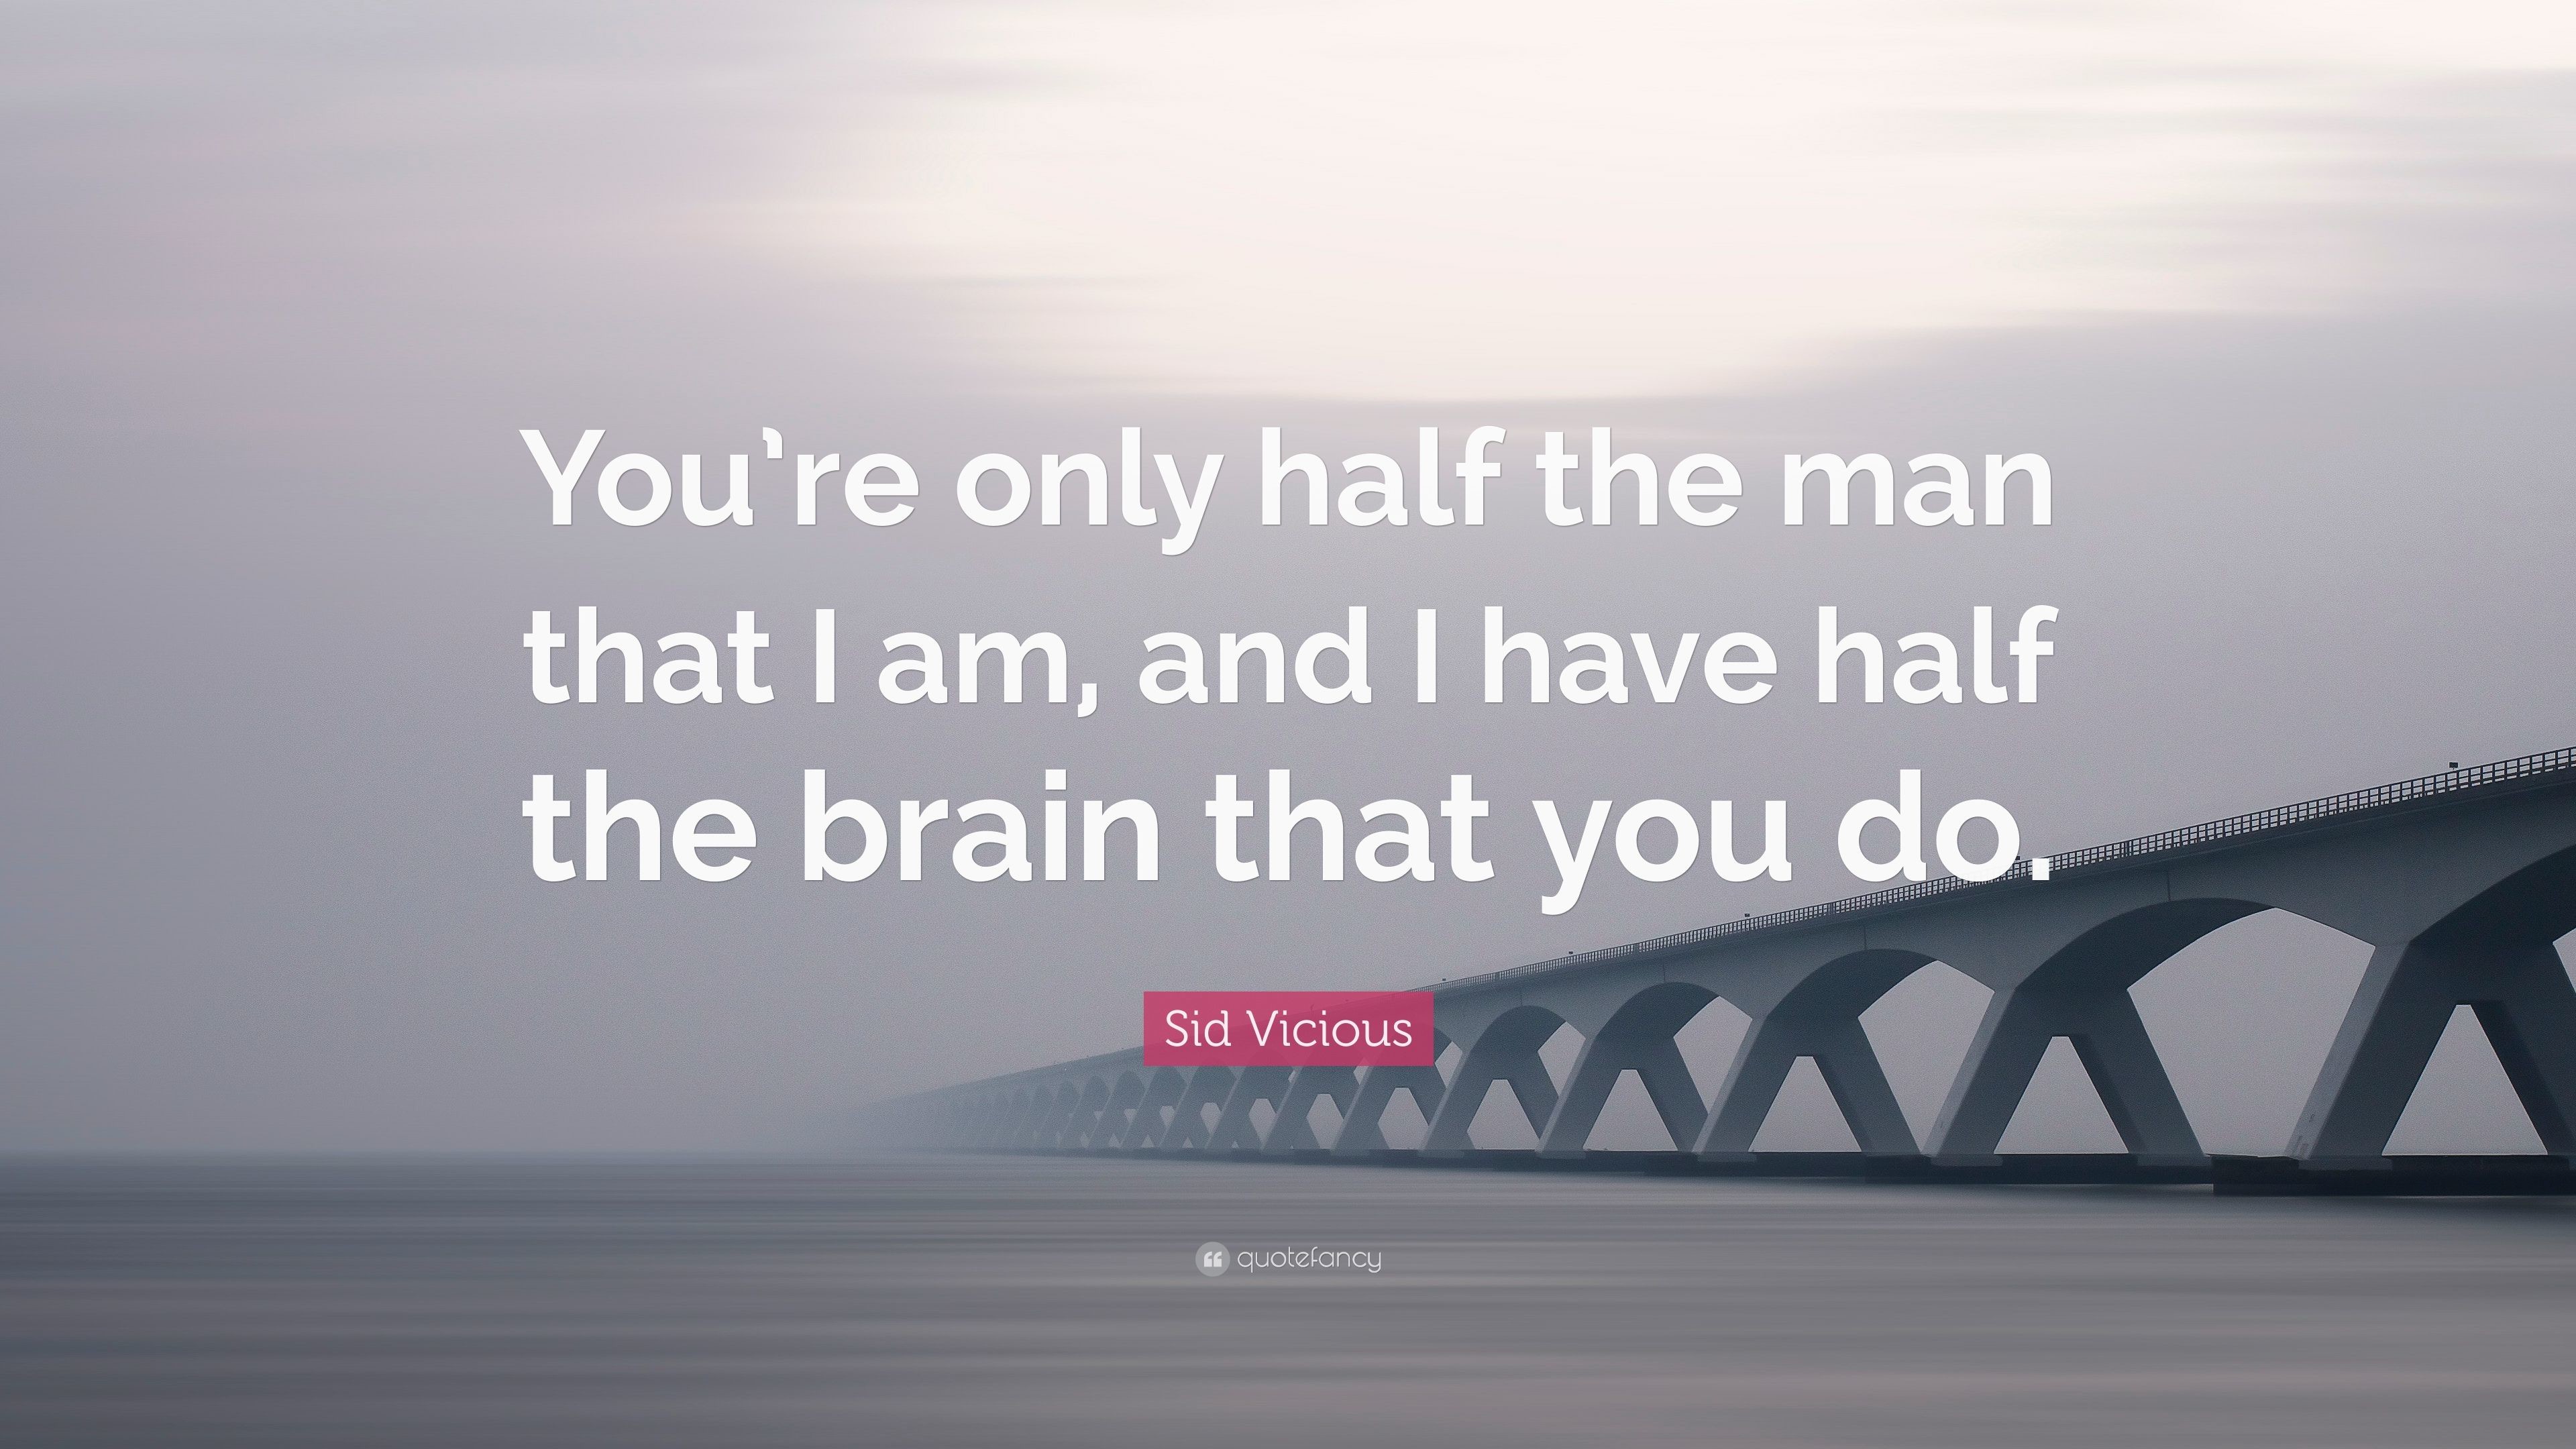 3840x2160 Sid Vicious Quote: “You're only half the man that I am,